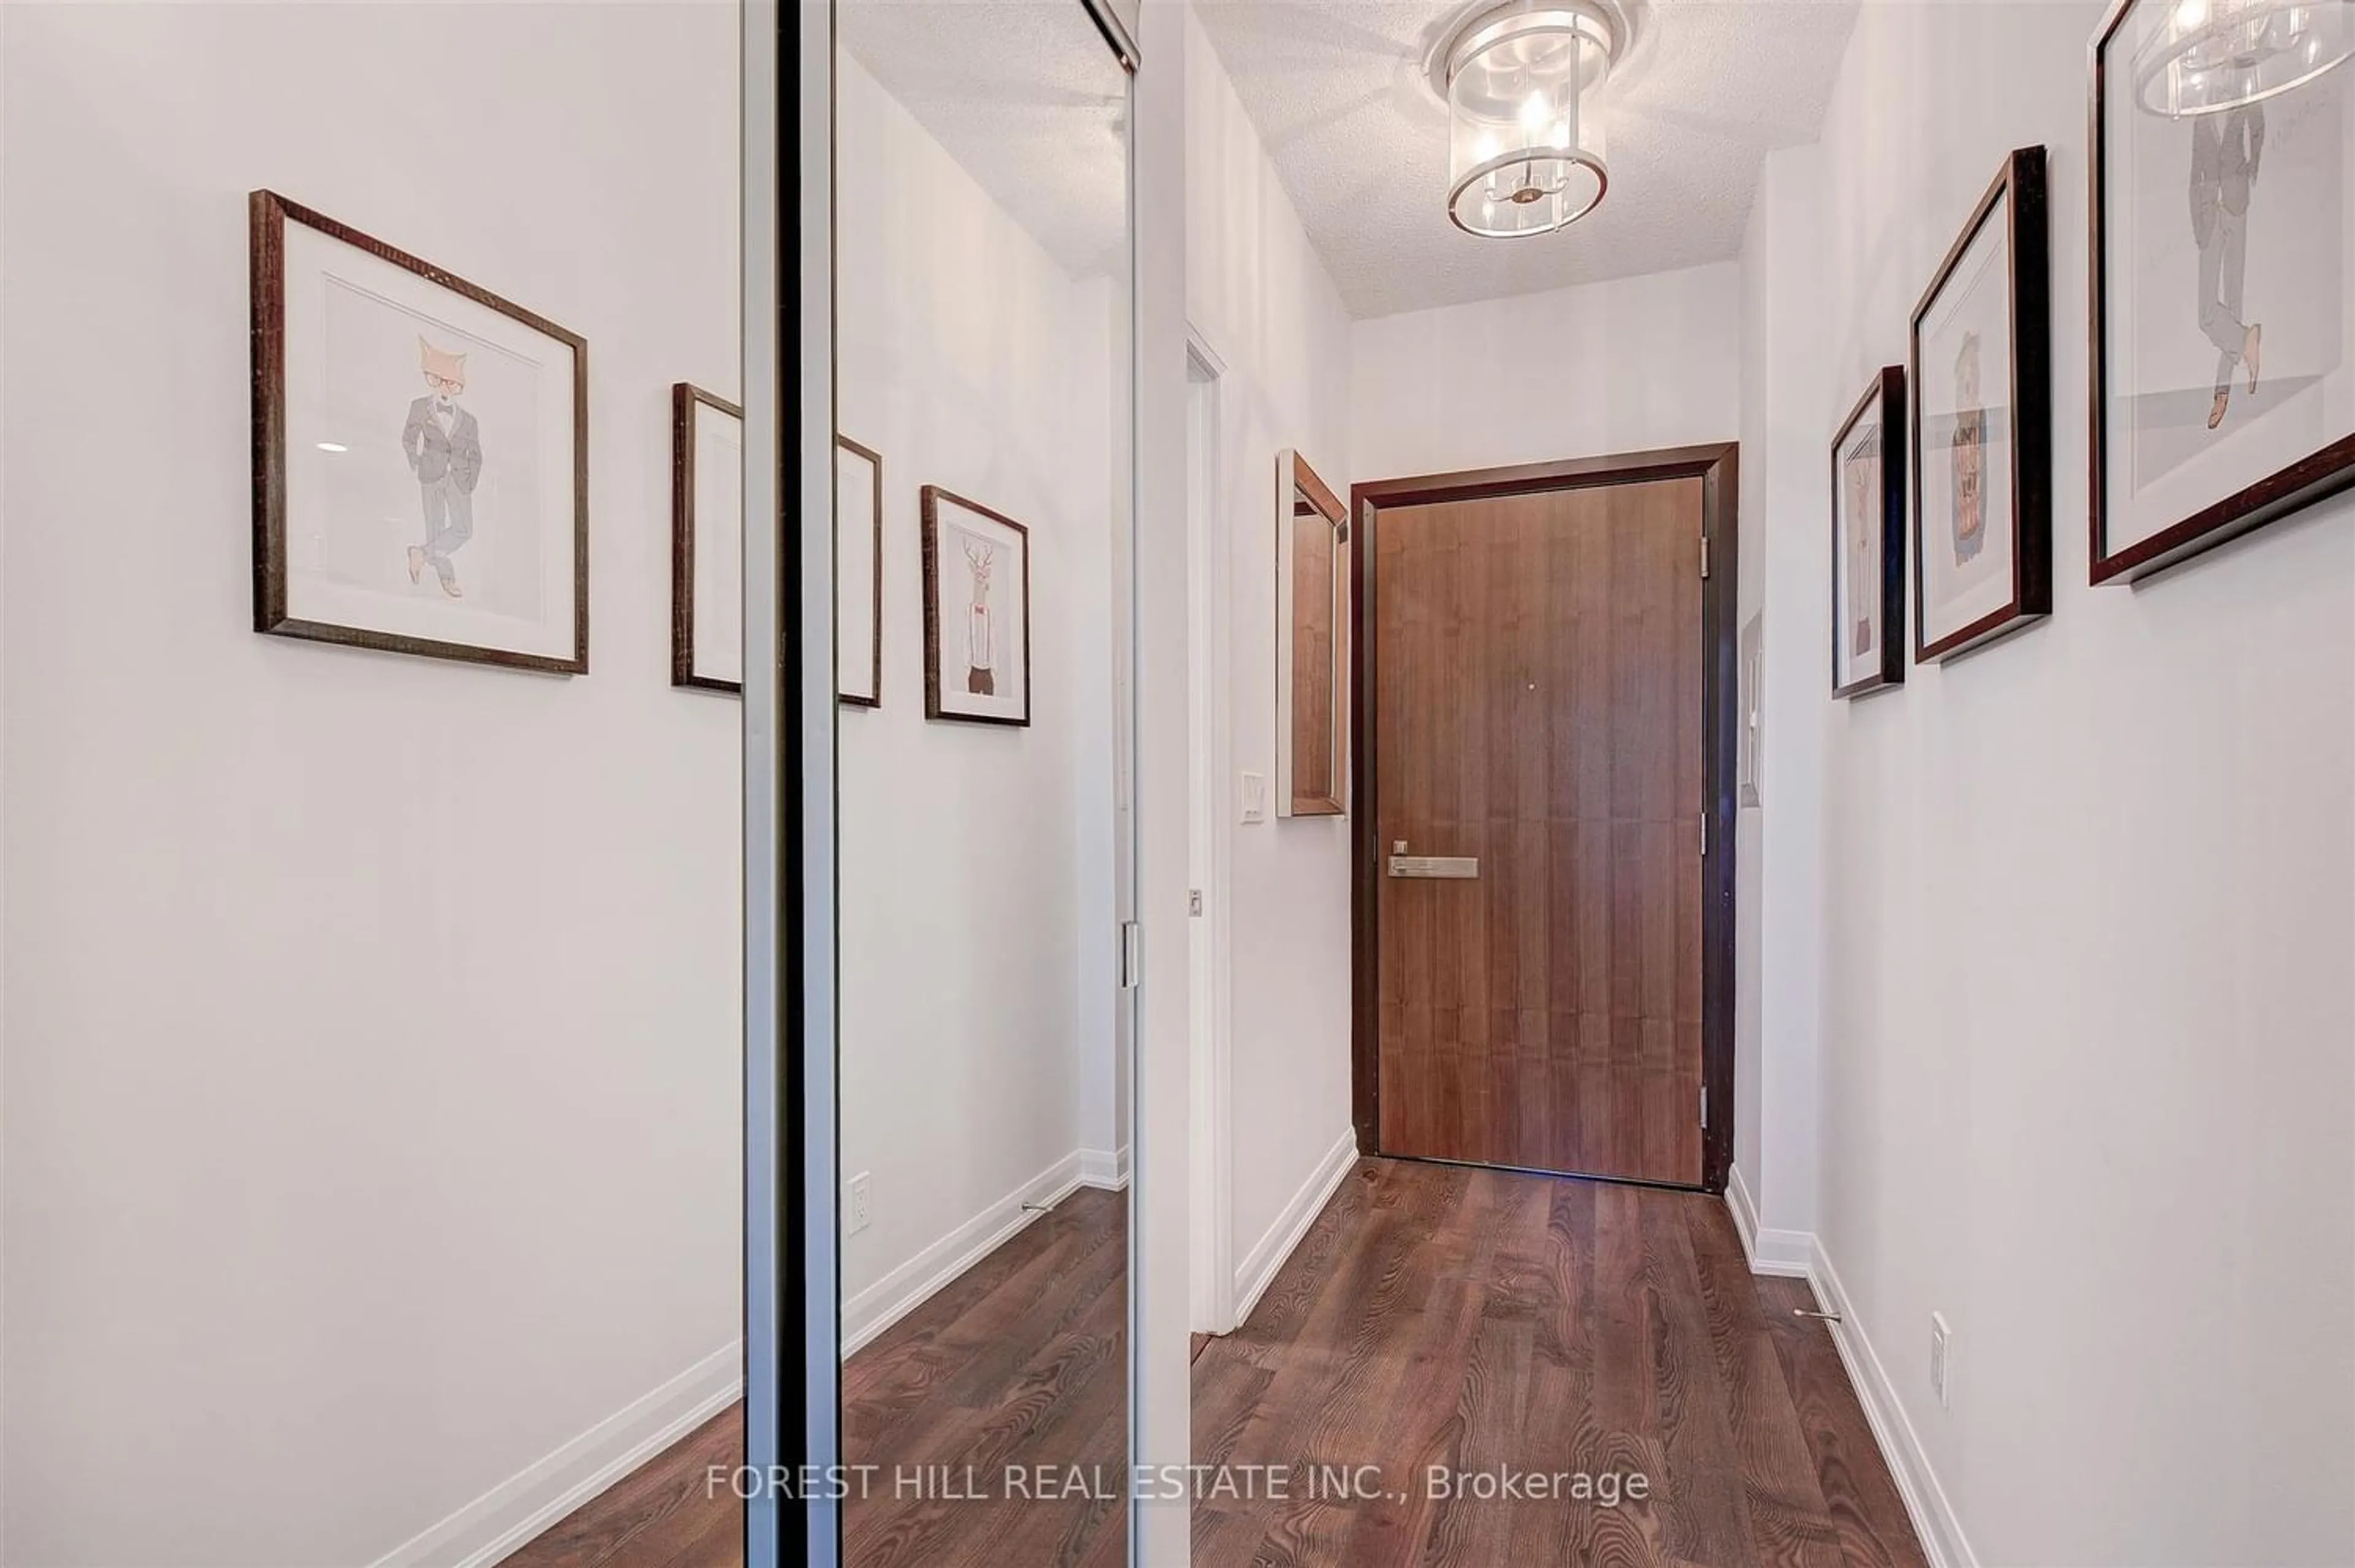 Indoor entryway for 500 Sherbourne St #801, Toronto Ontario M4X 1L1